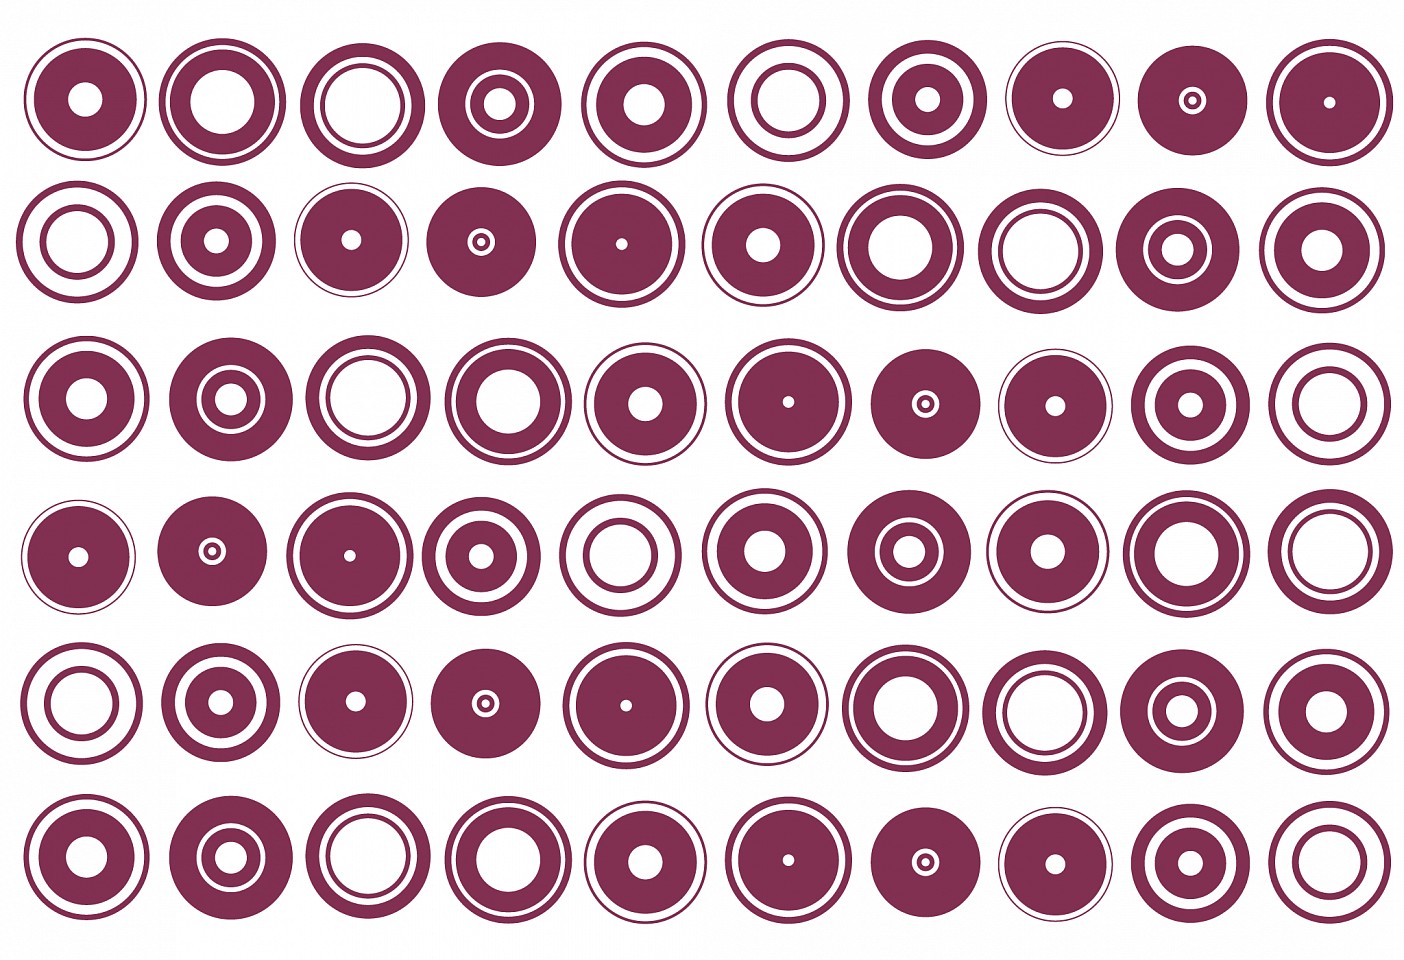 Dane Albert, Circles #41, 2023
Acrylic on canvas (Concept), 48 x 72 in. (121.9 x 182.9 cm)
Series of colored lines and shapes in multiple configurations
DA.2023-041